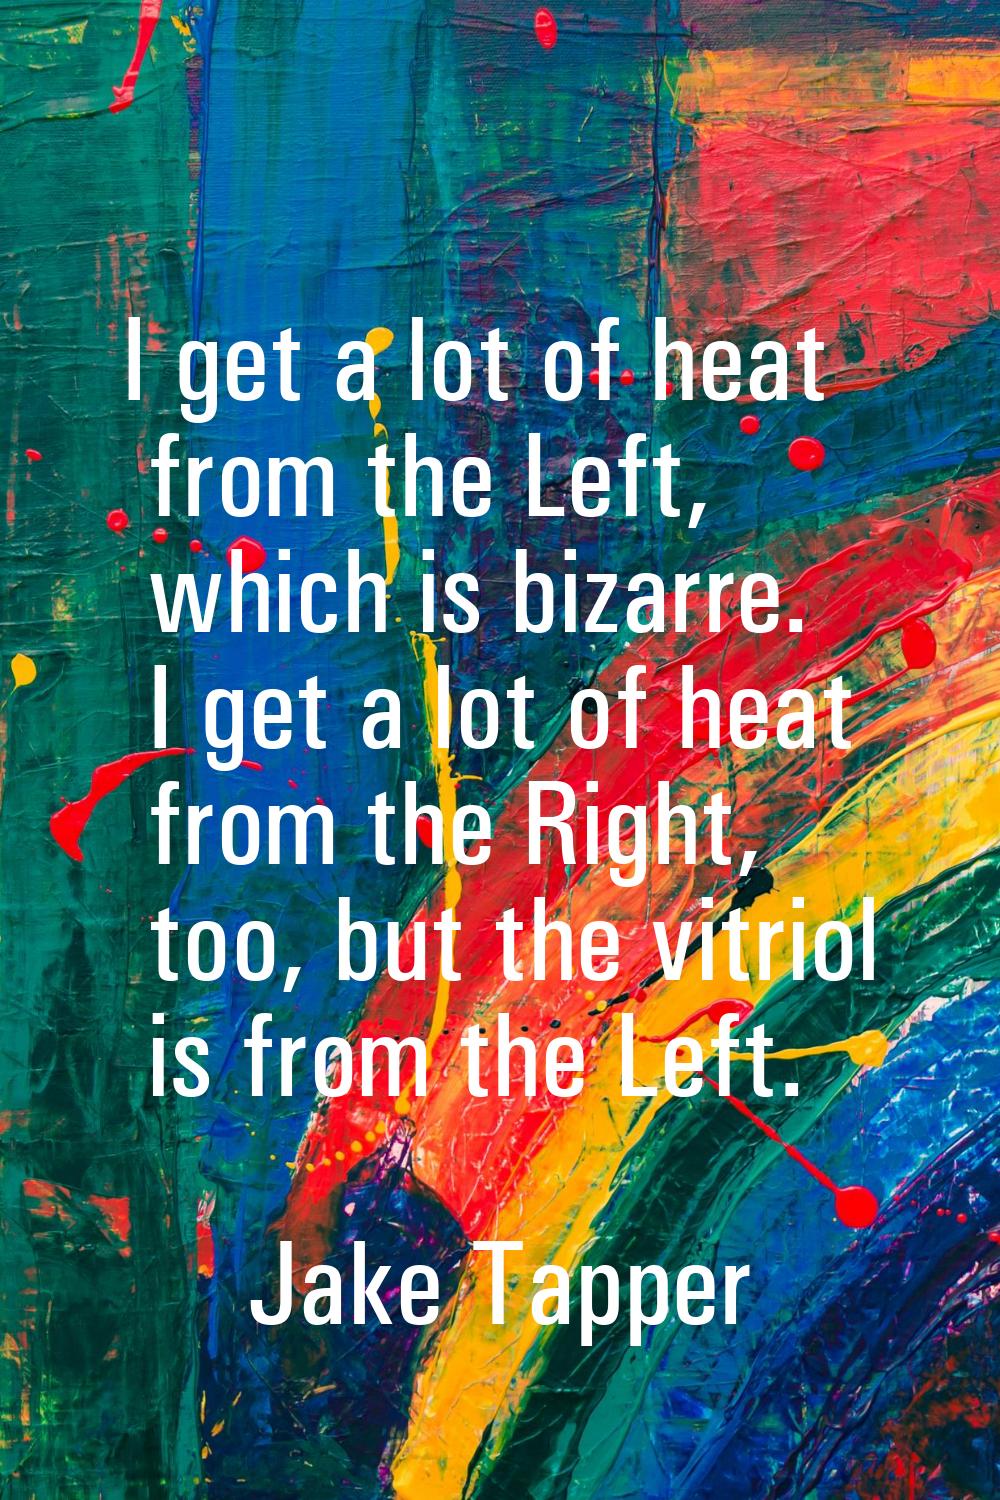 I get a lot of heat from the Left, which is bizarre. I get a lot of heat from the Right, too, but t